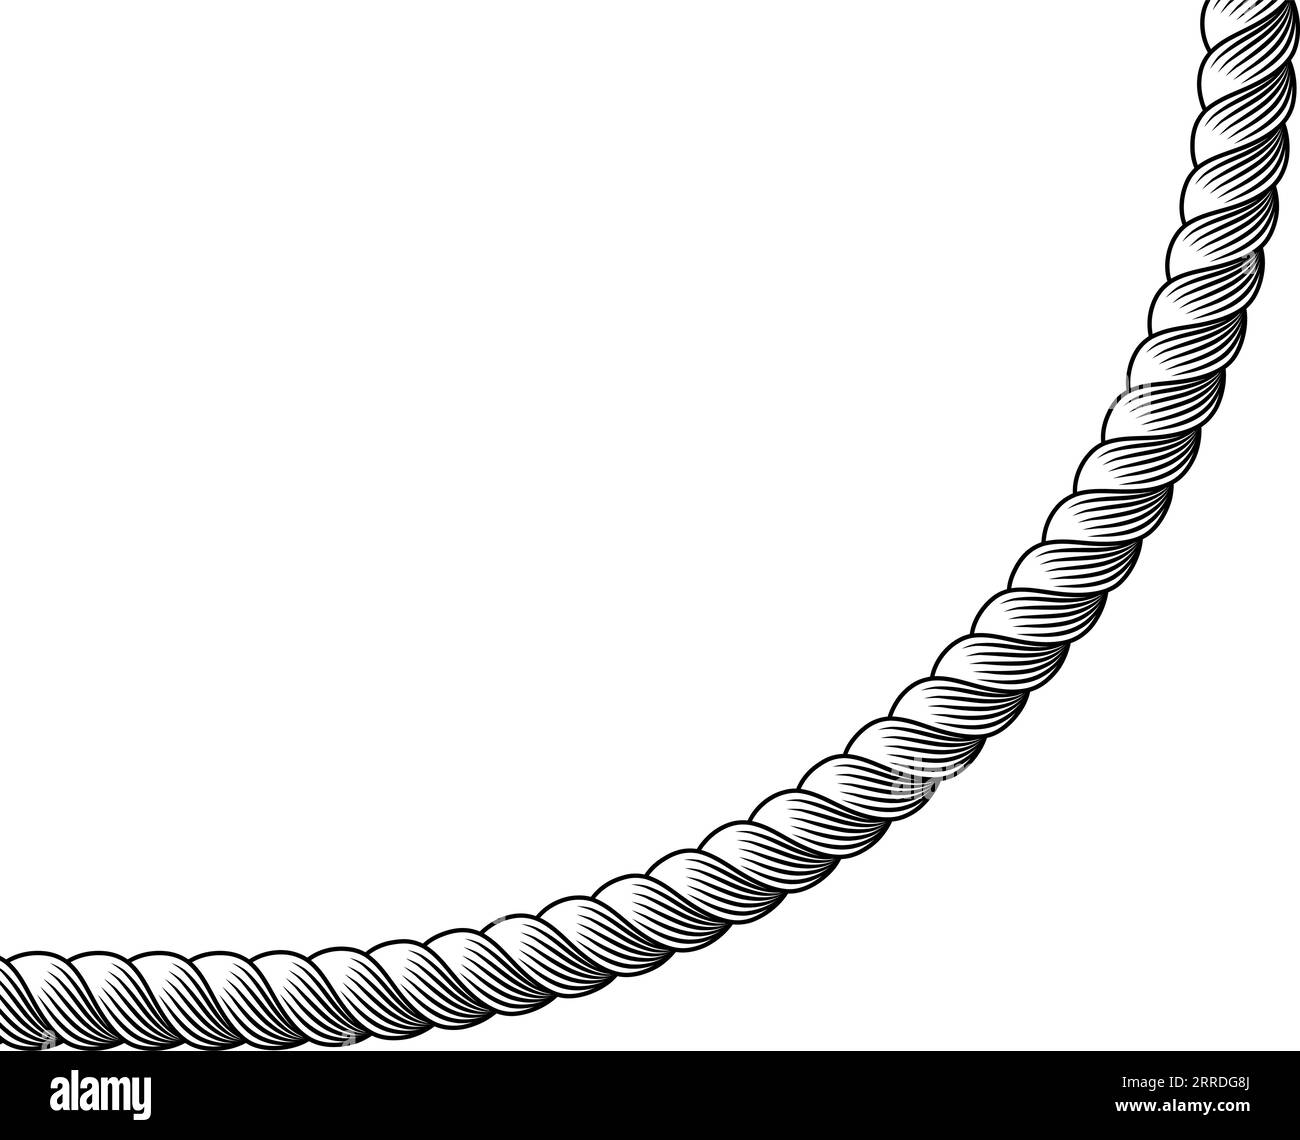 Border rope Black and White Stock Photos & Images - Page 3 - Alamy